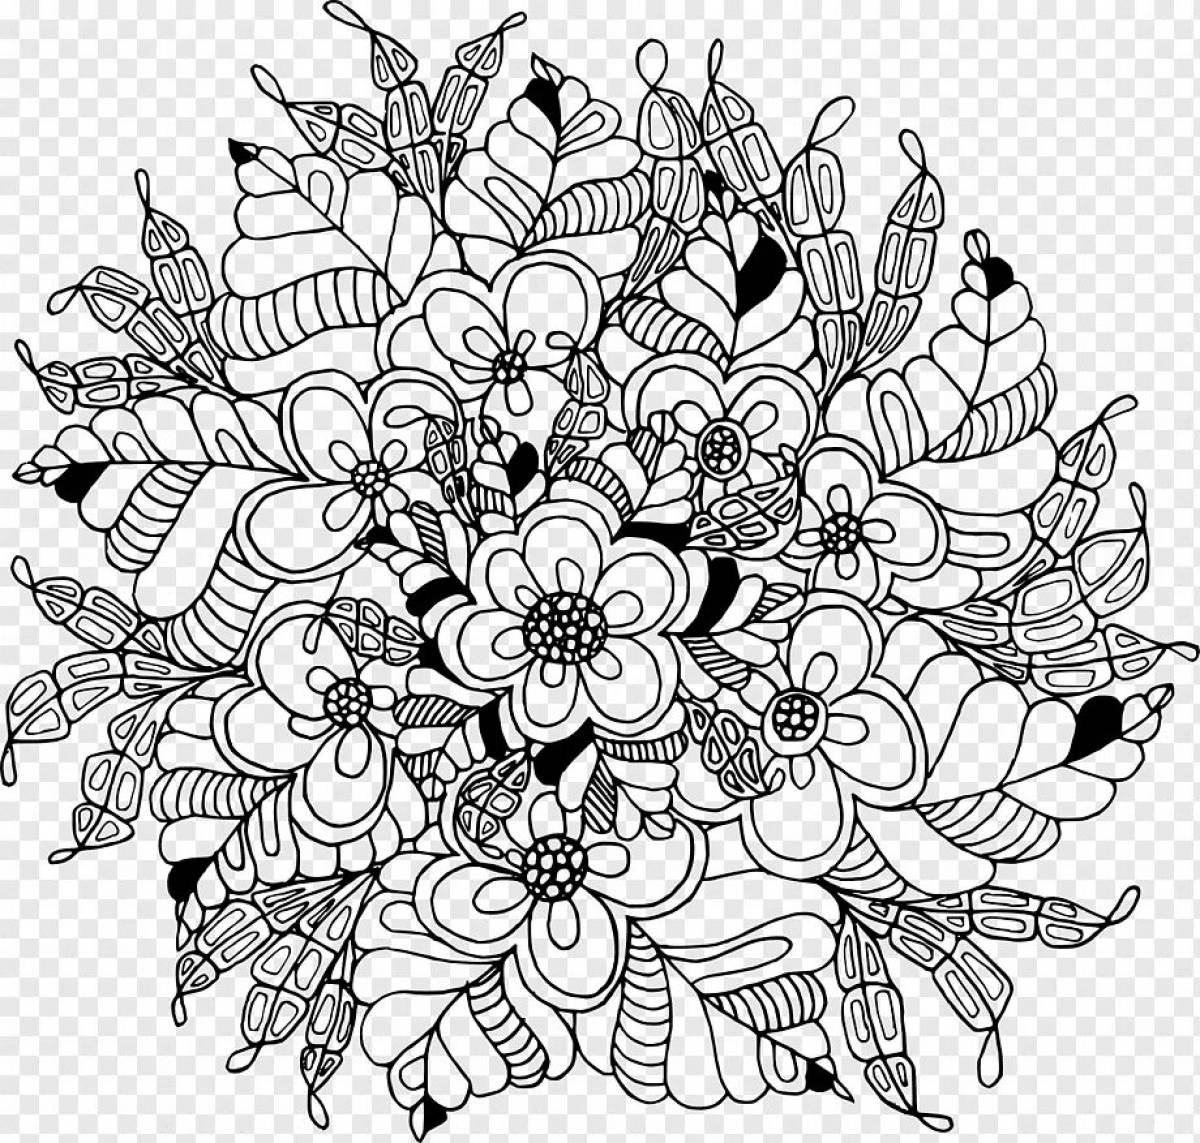 Great filling coloring page